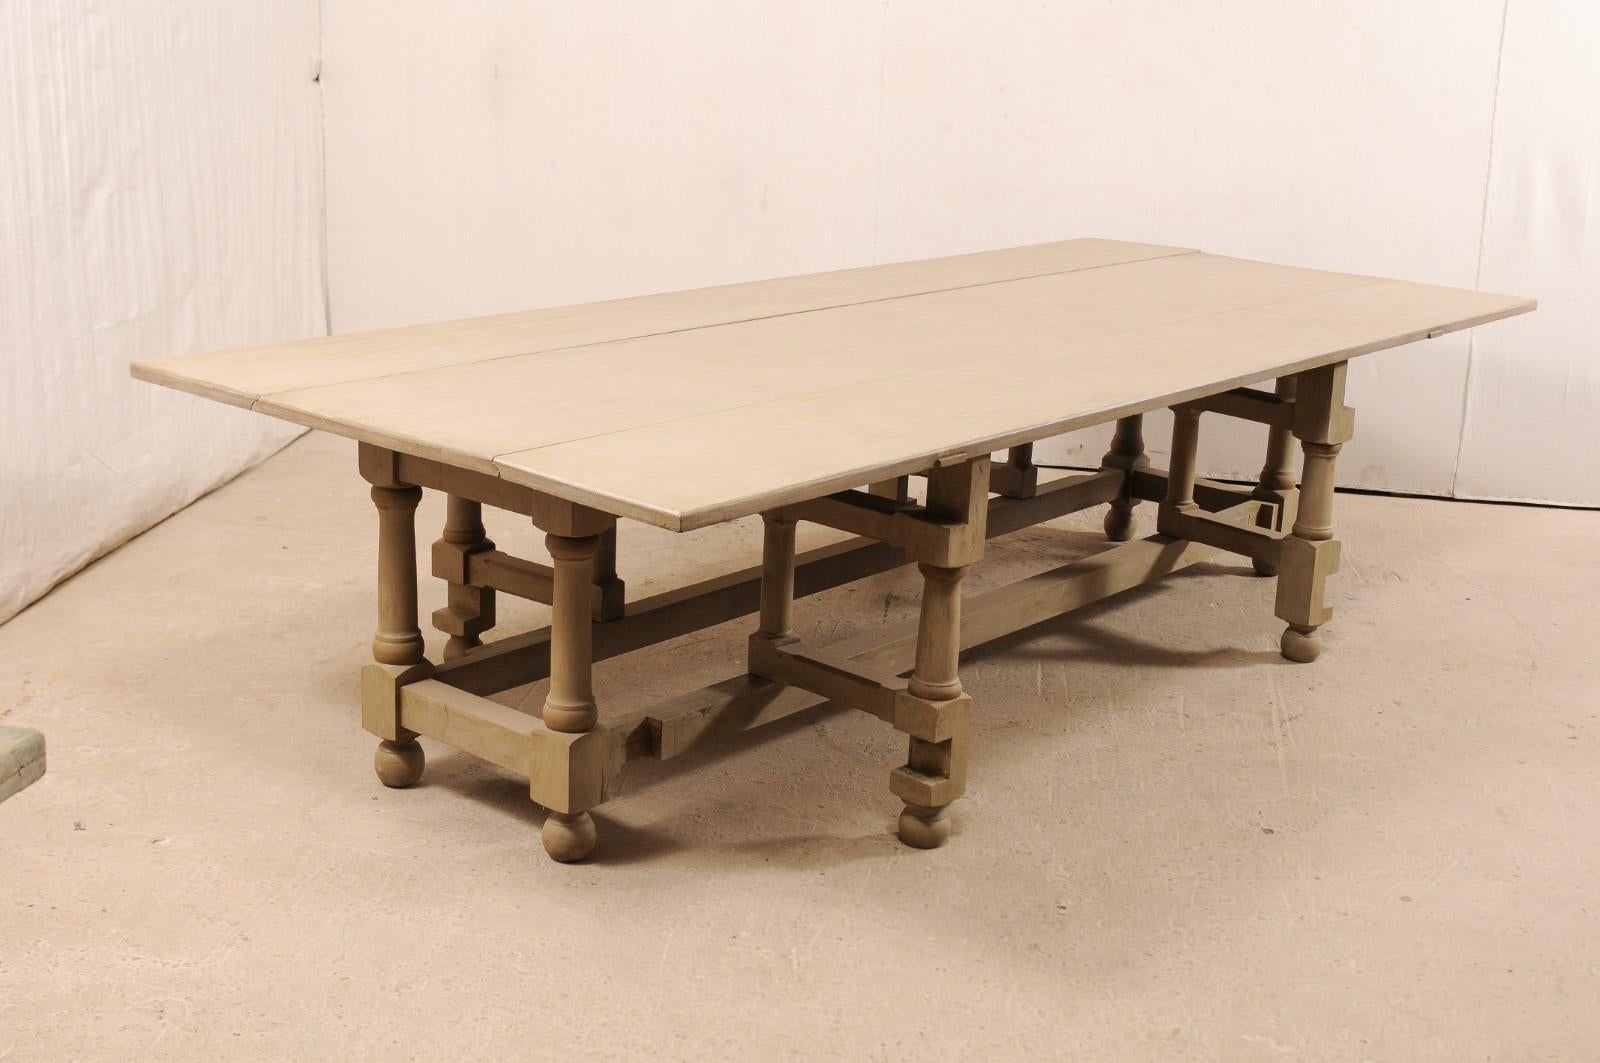 A large-size double gate-leg drop leaf painted American poplar wood table. This vintage American table features a rectangular-shaped top with two drop leaf sides, and a double set of gate legs. The baluster style legs are supported with a box